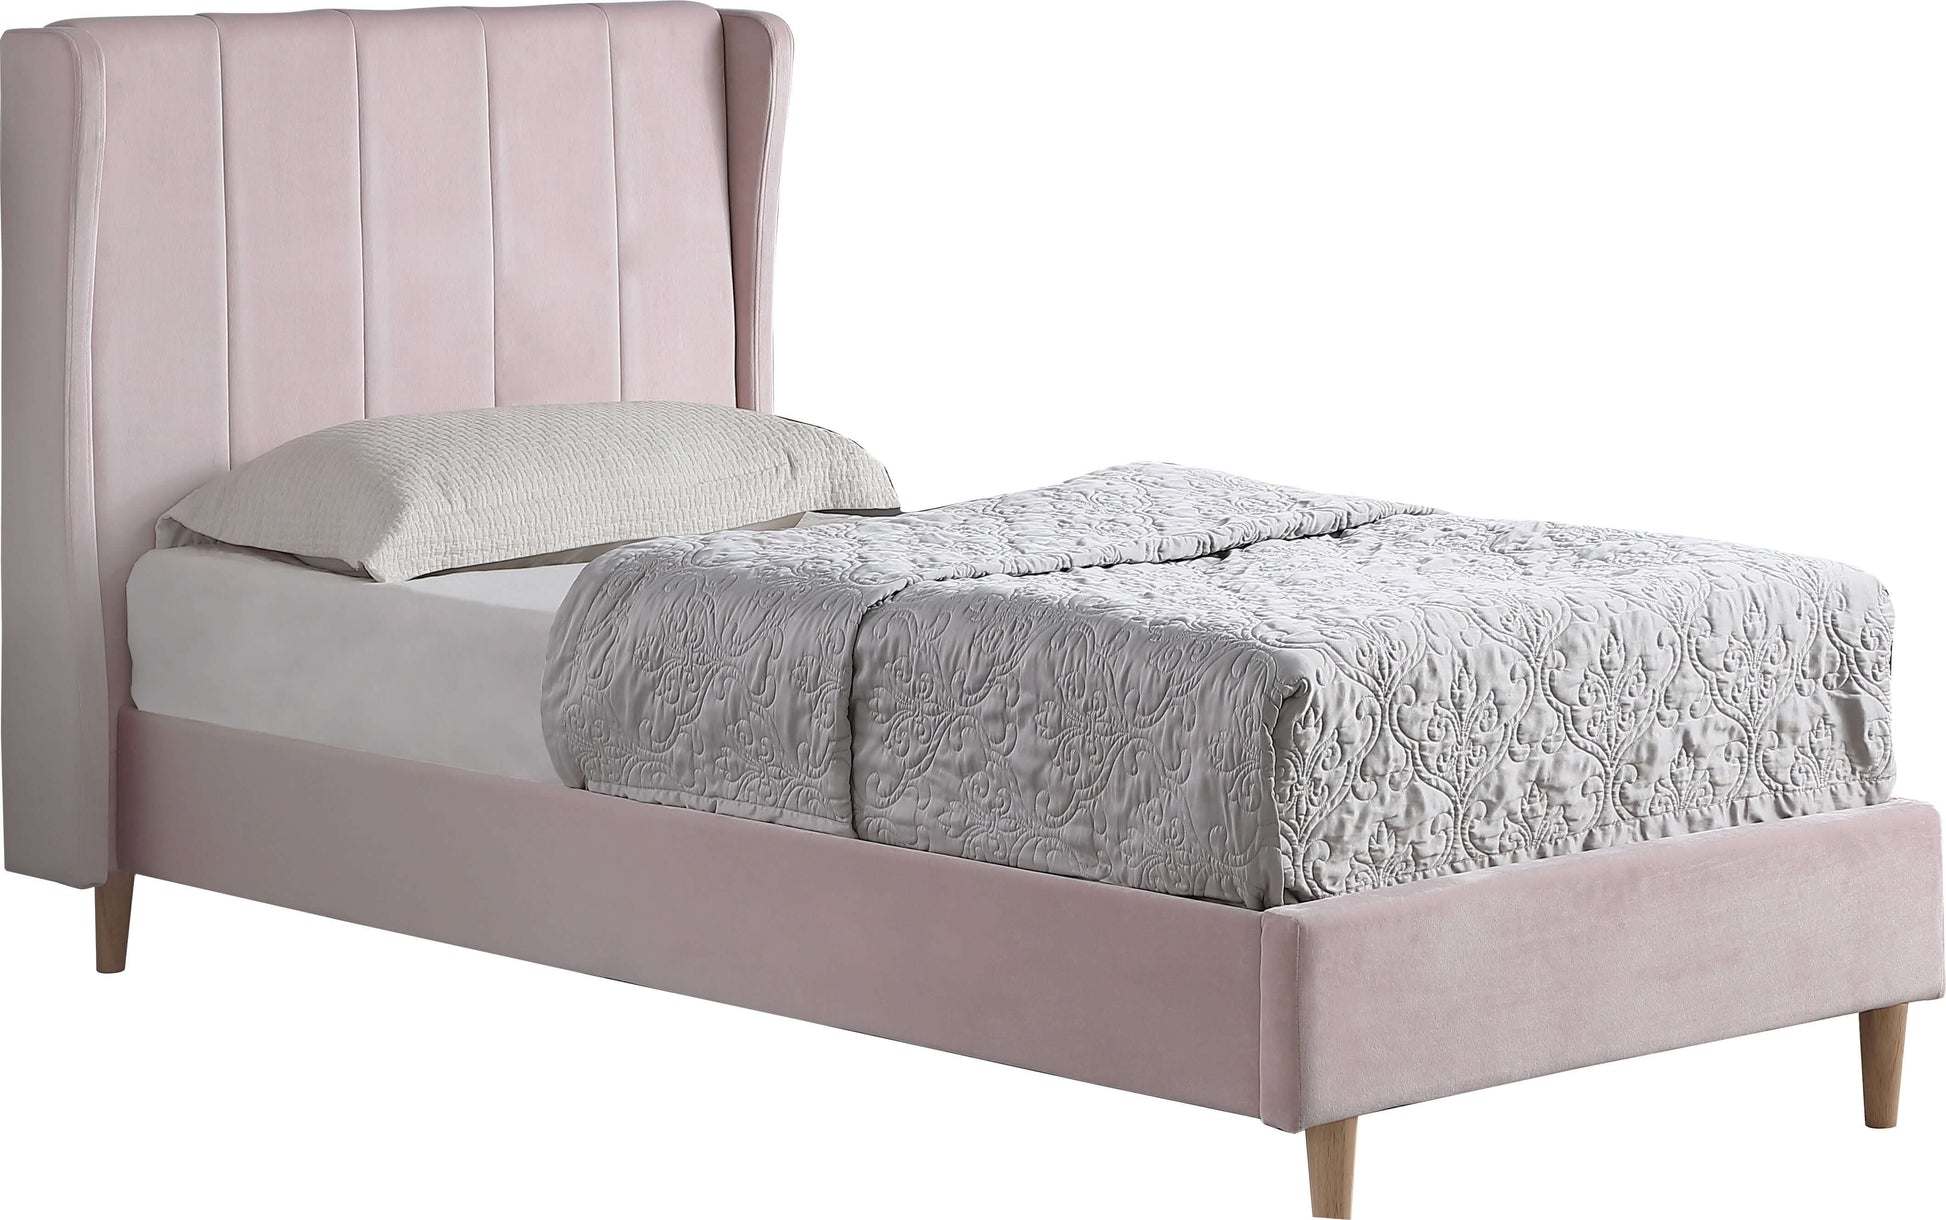 Amelia 3' Single Bed - Pink Velvet Fabric- The Right Buy Store